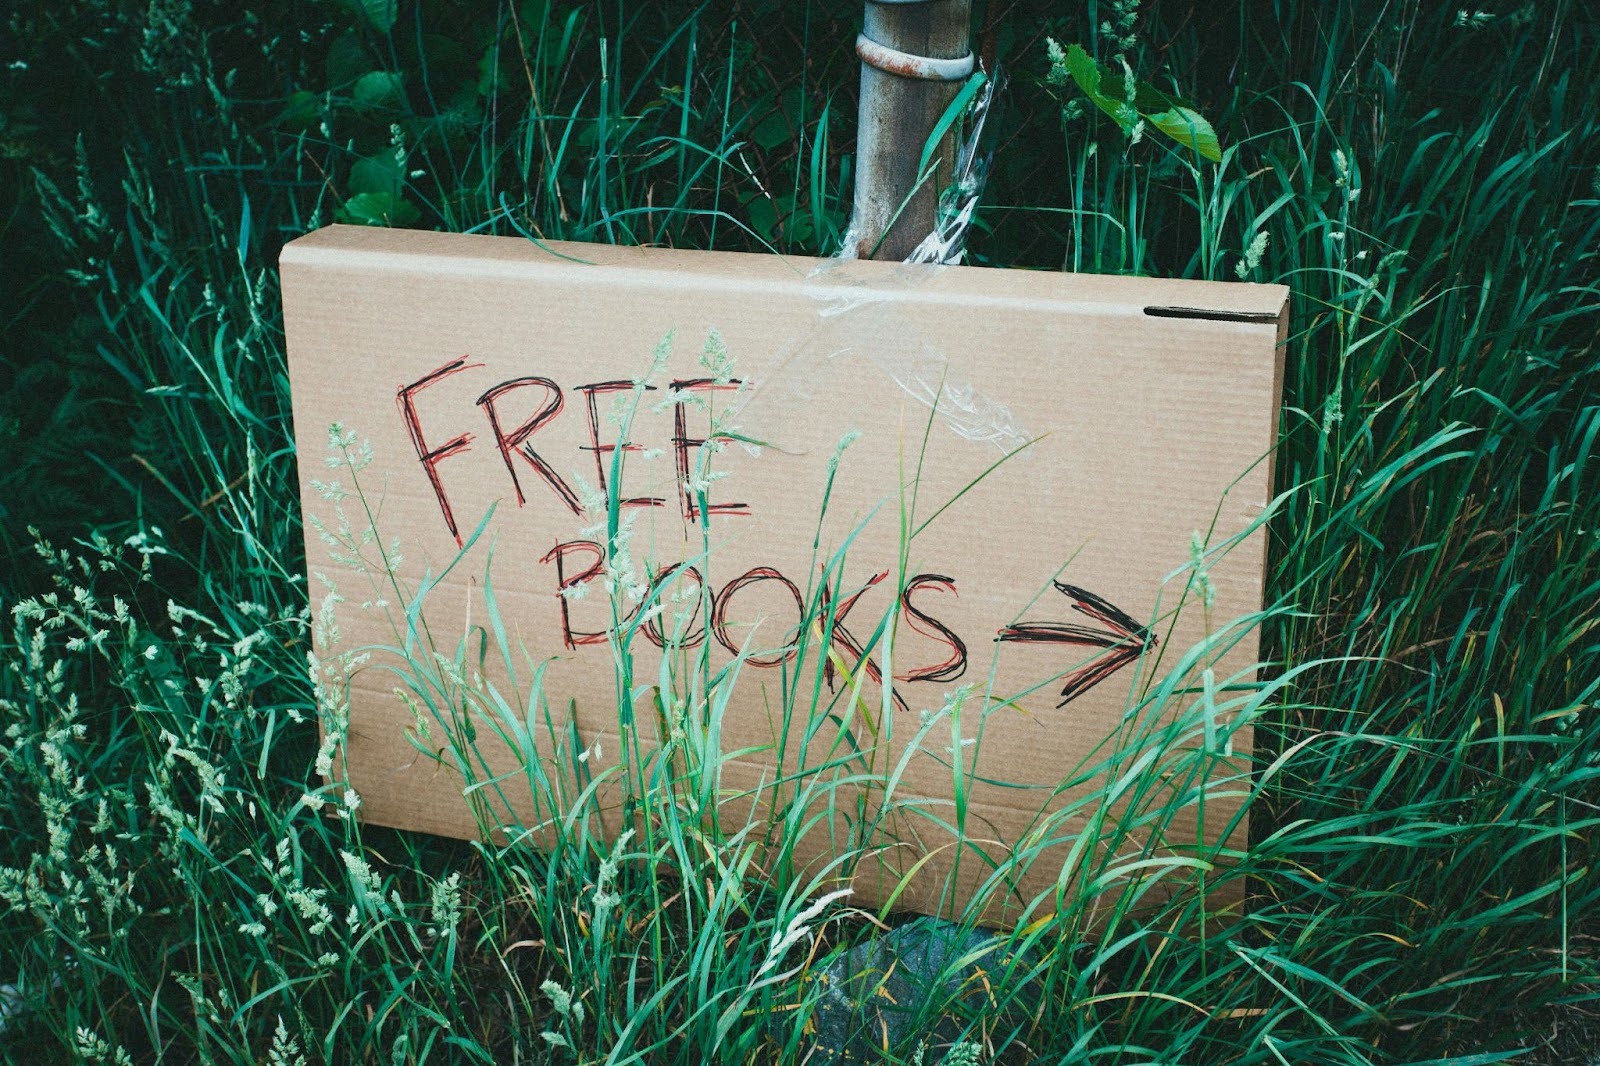 A cardboard sign advertising free books